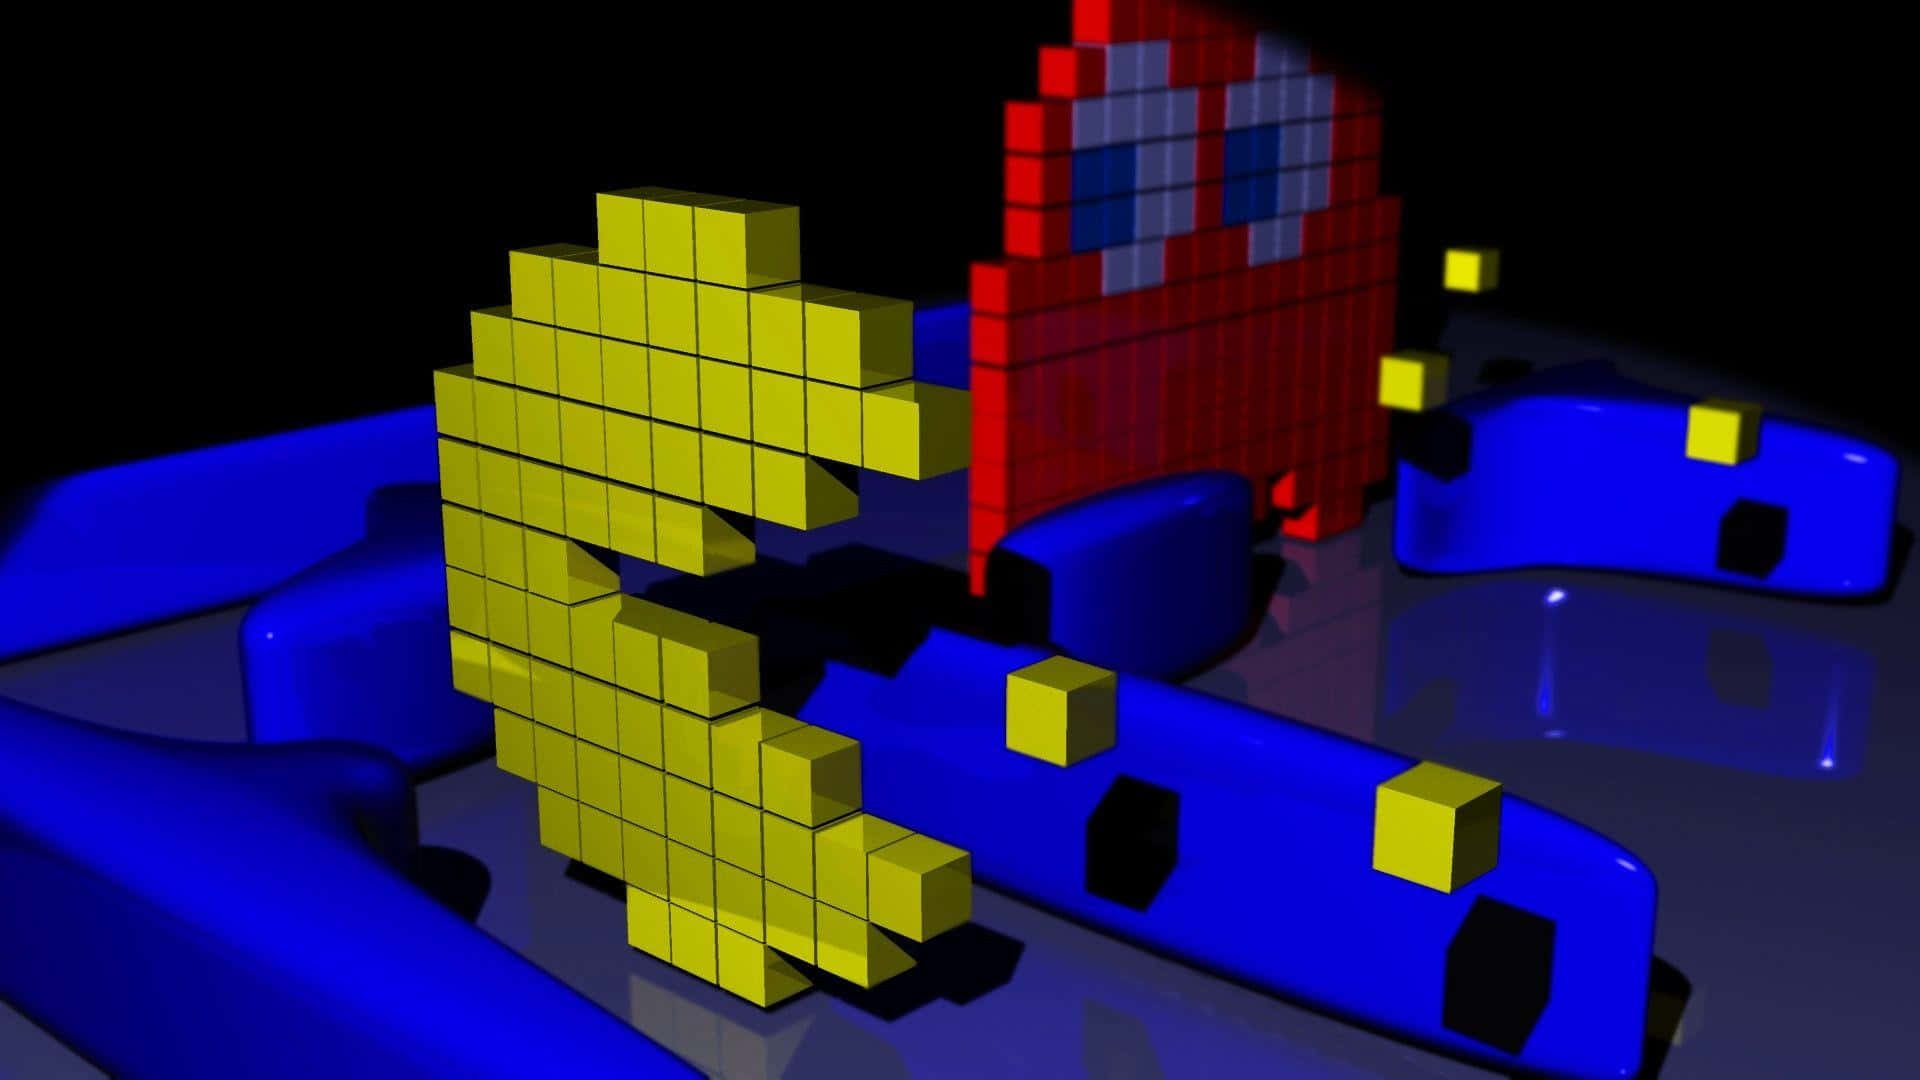 A Blue And Yellow Pixelated Image Of A Pac Man Game Background